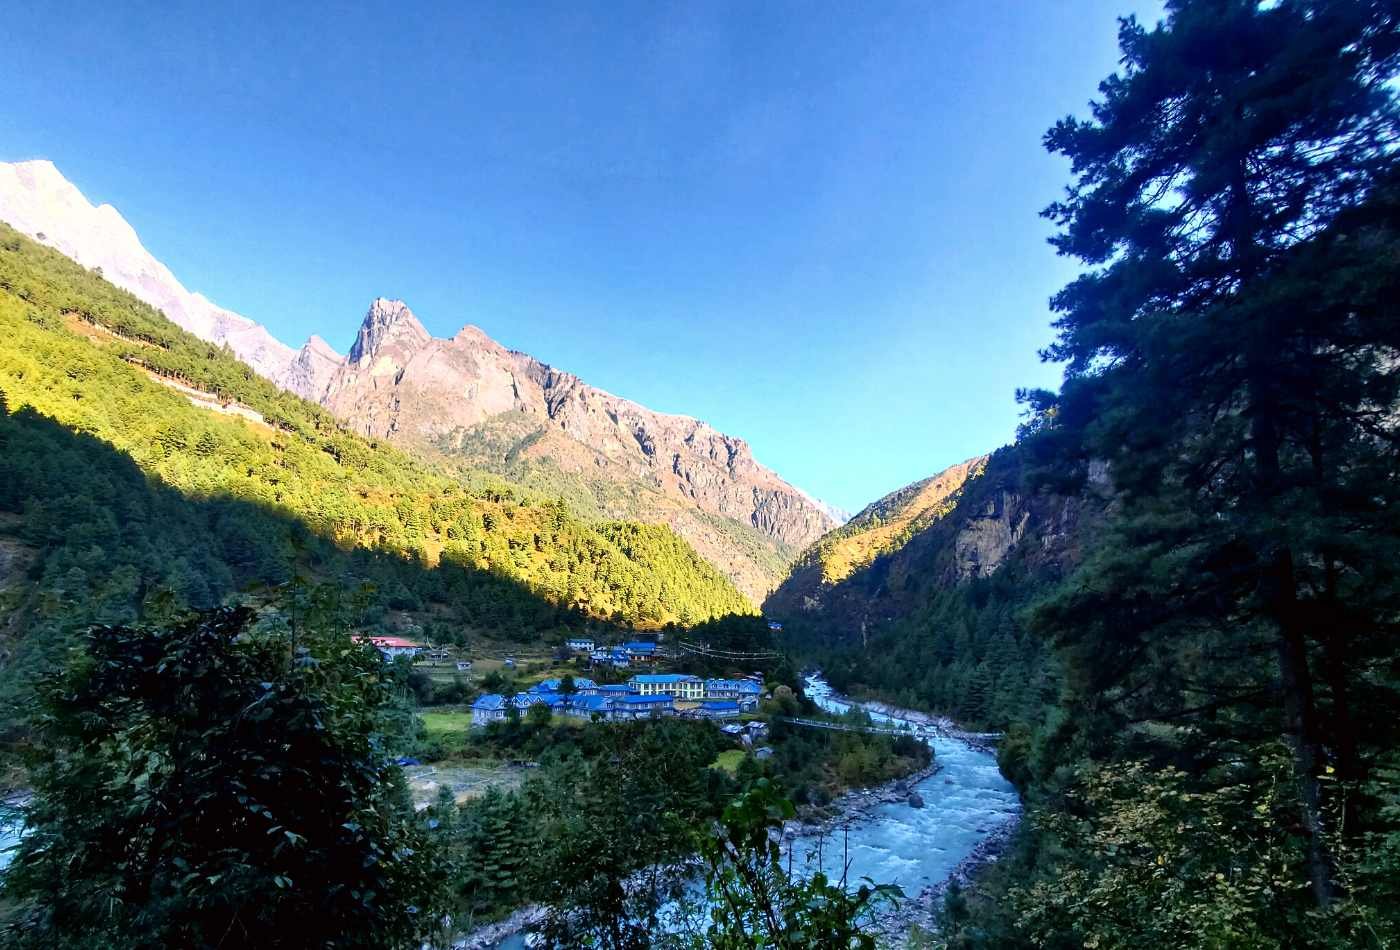 The village of Phikding bathed in the warm light of sunrise, with the Dudh Koshi river flowing by the side of the village.